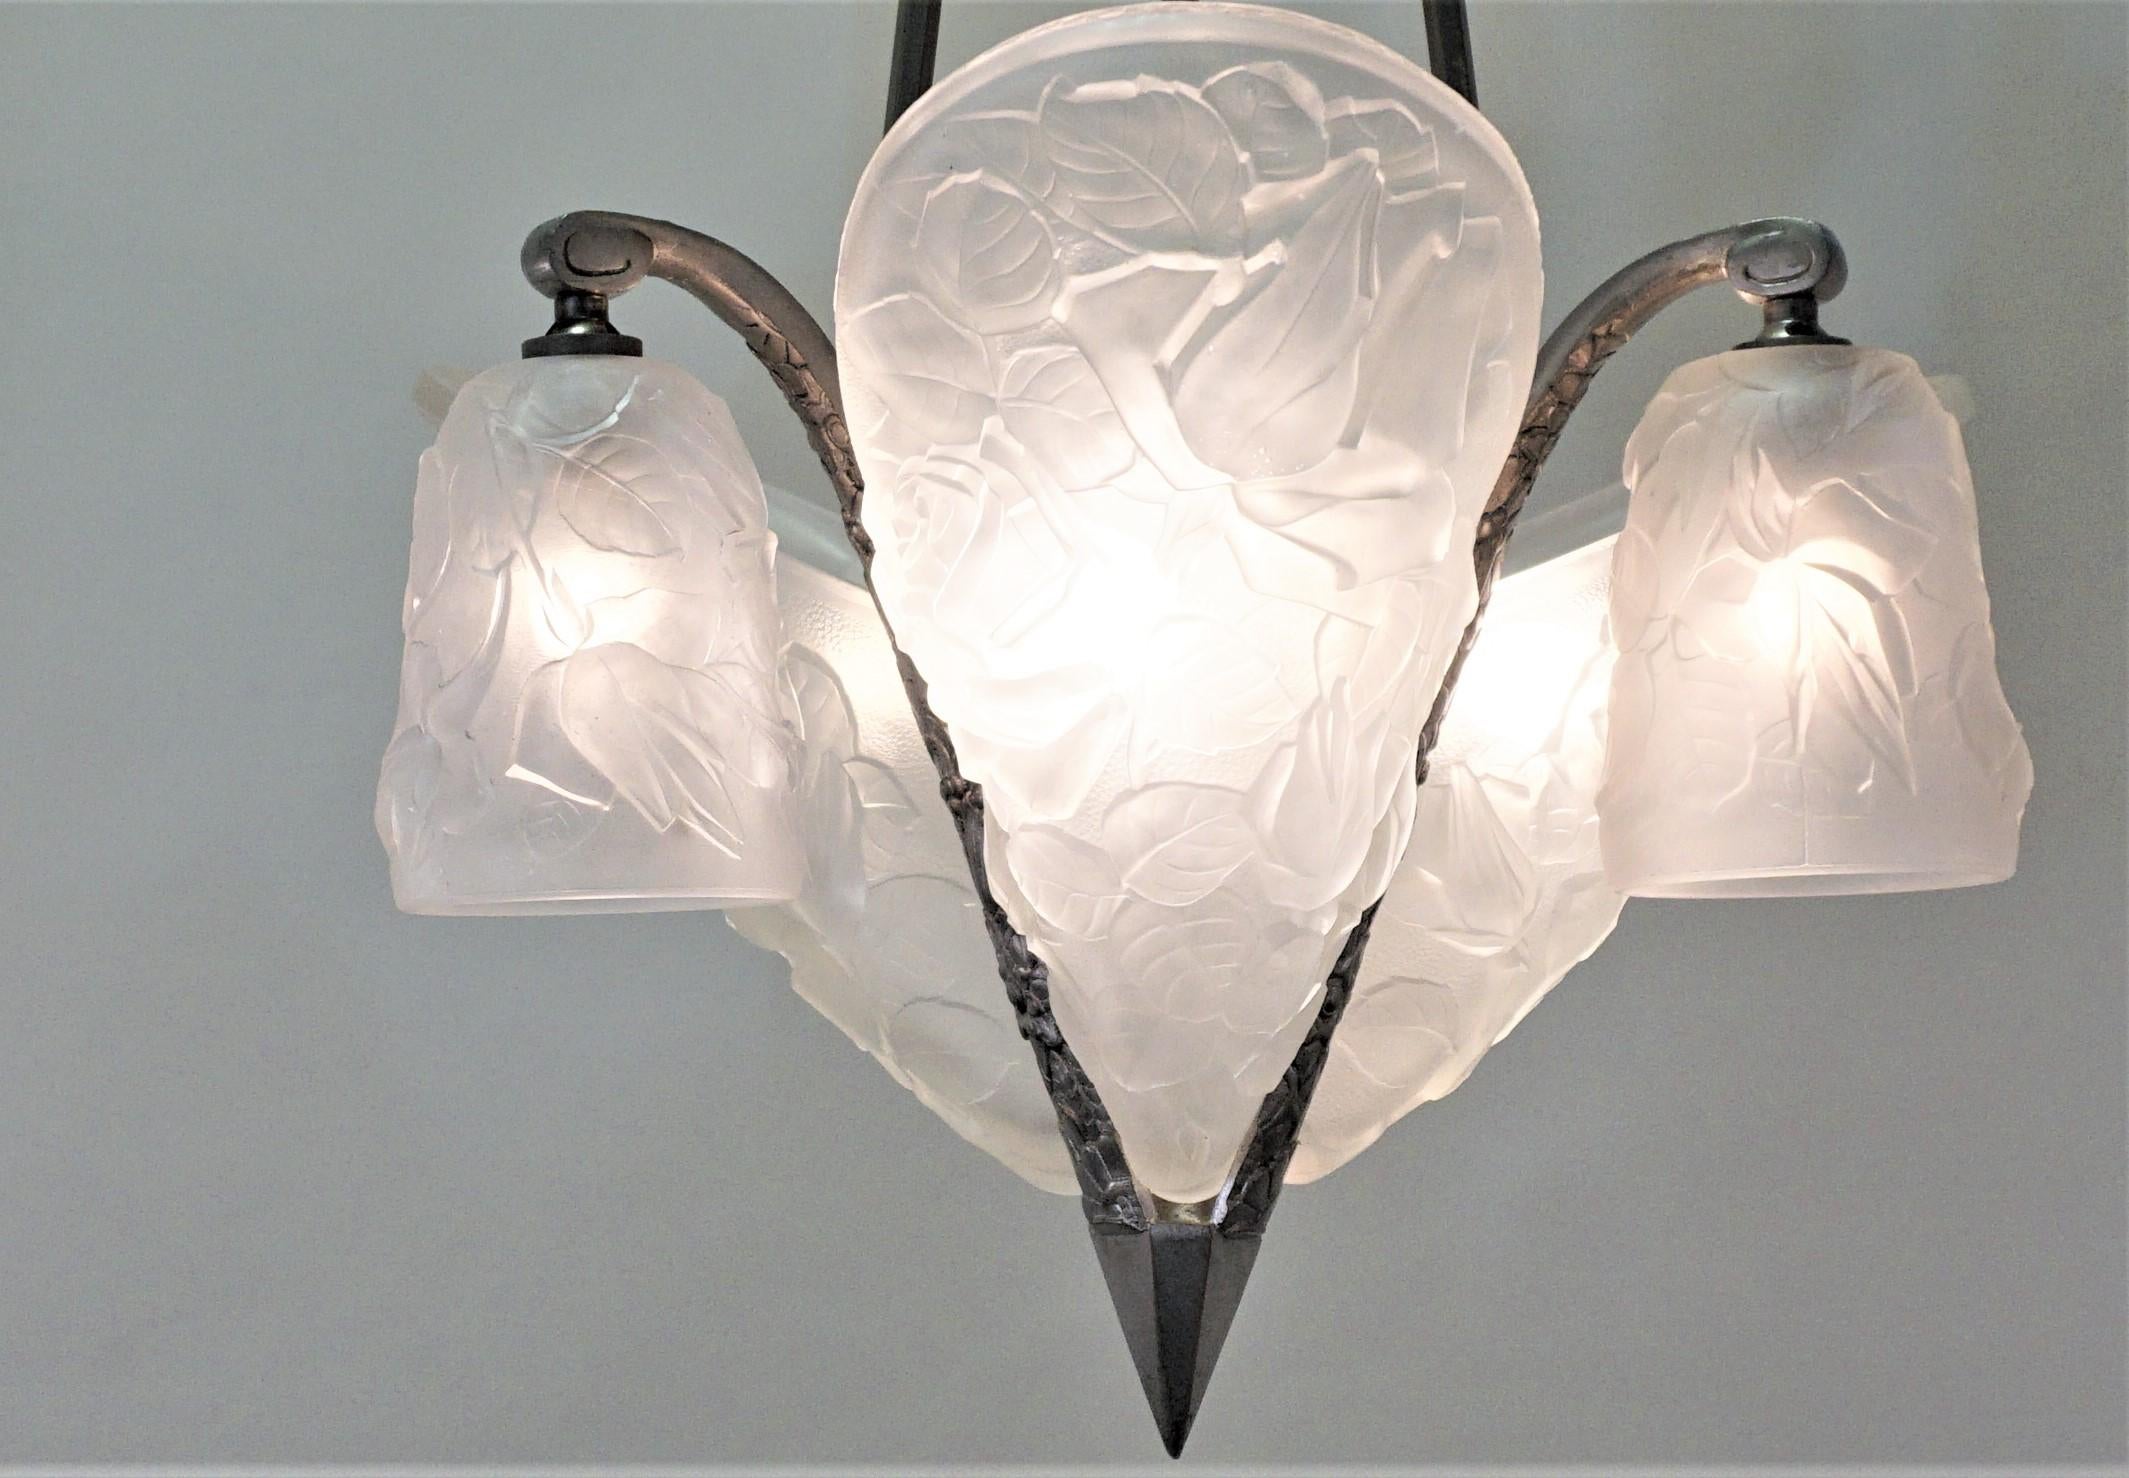 French 1930s Art Deco Chandelier In Good Condition For Sale In Fairfax, VA